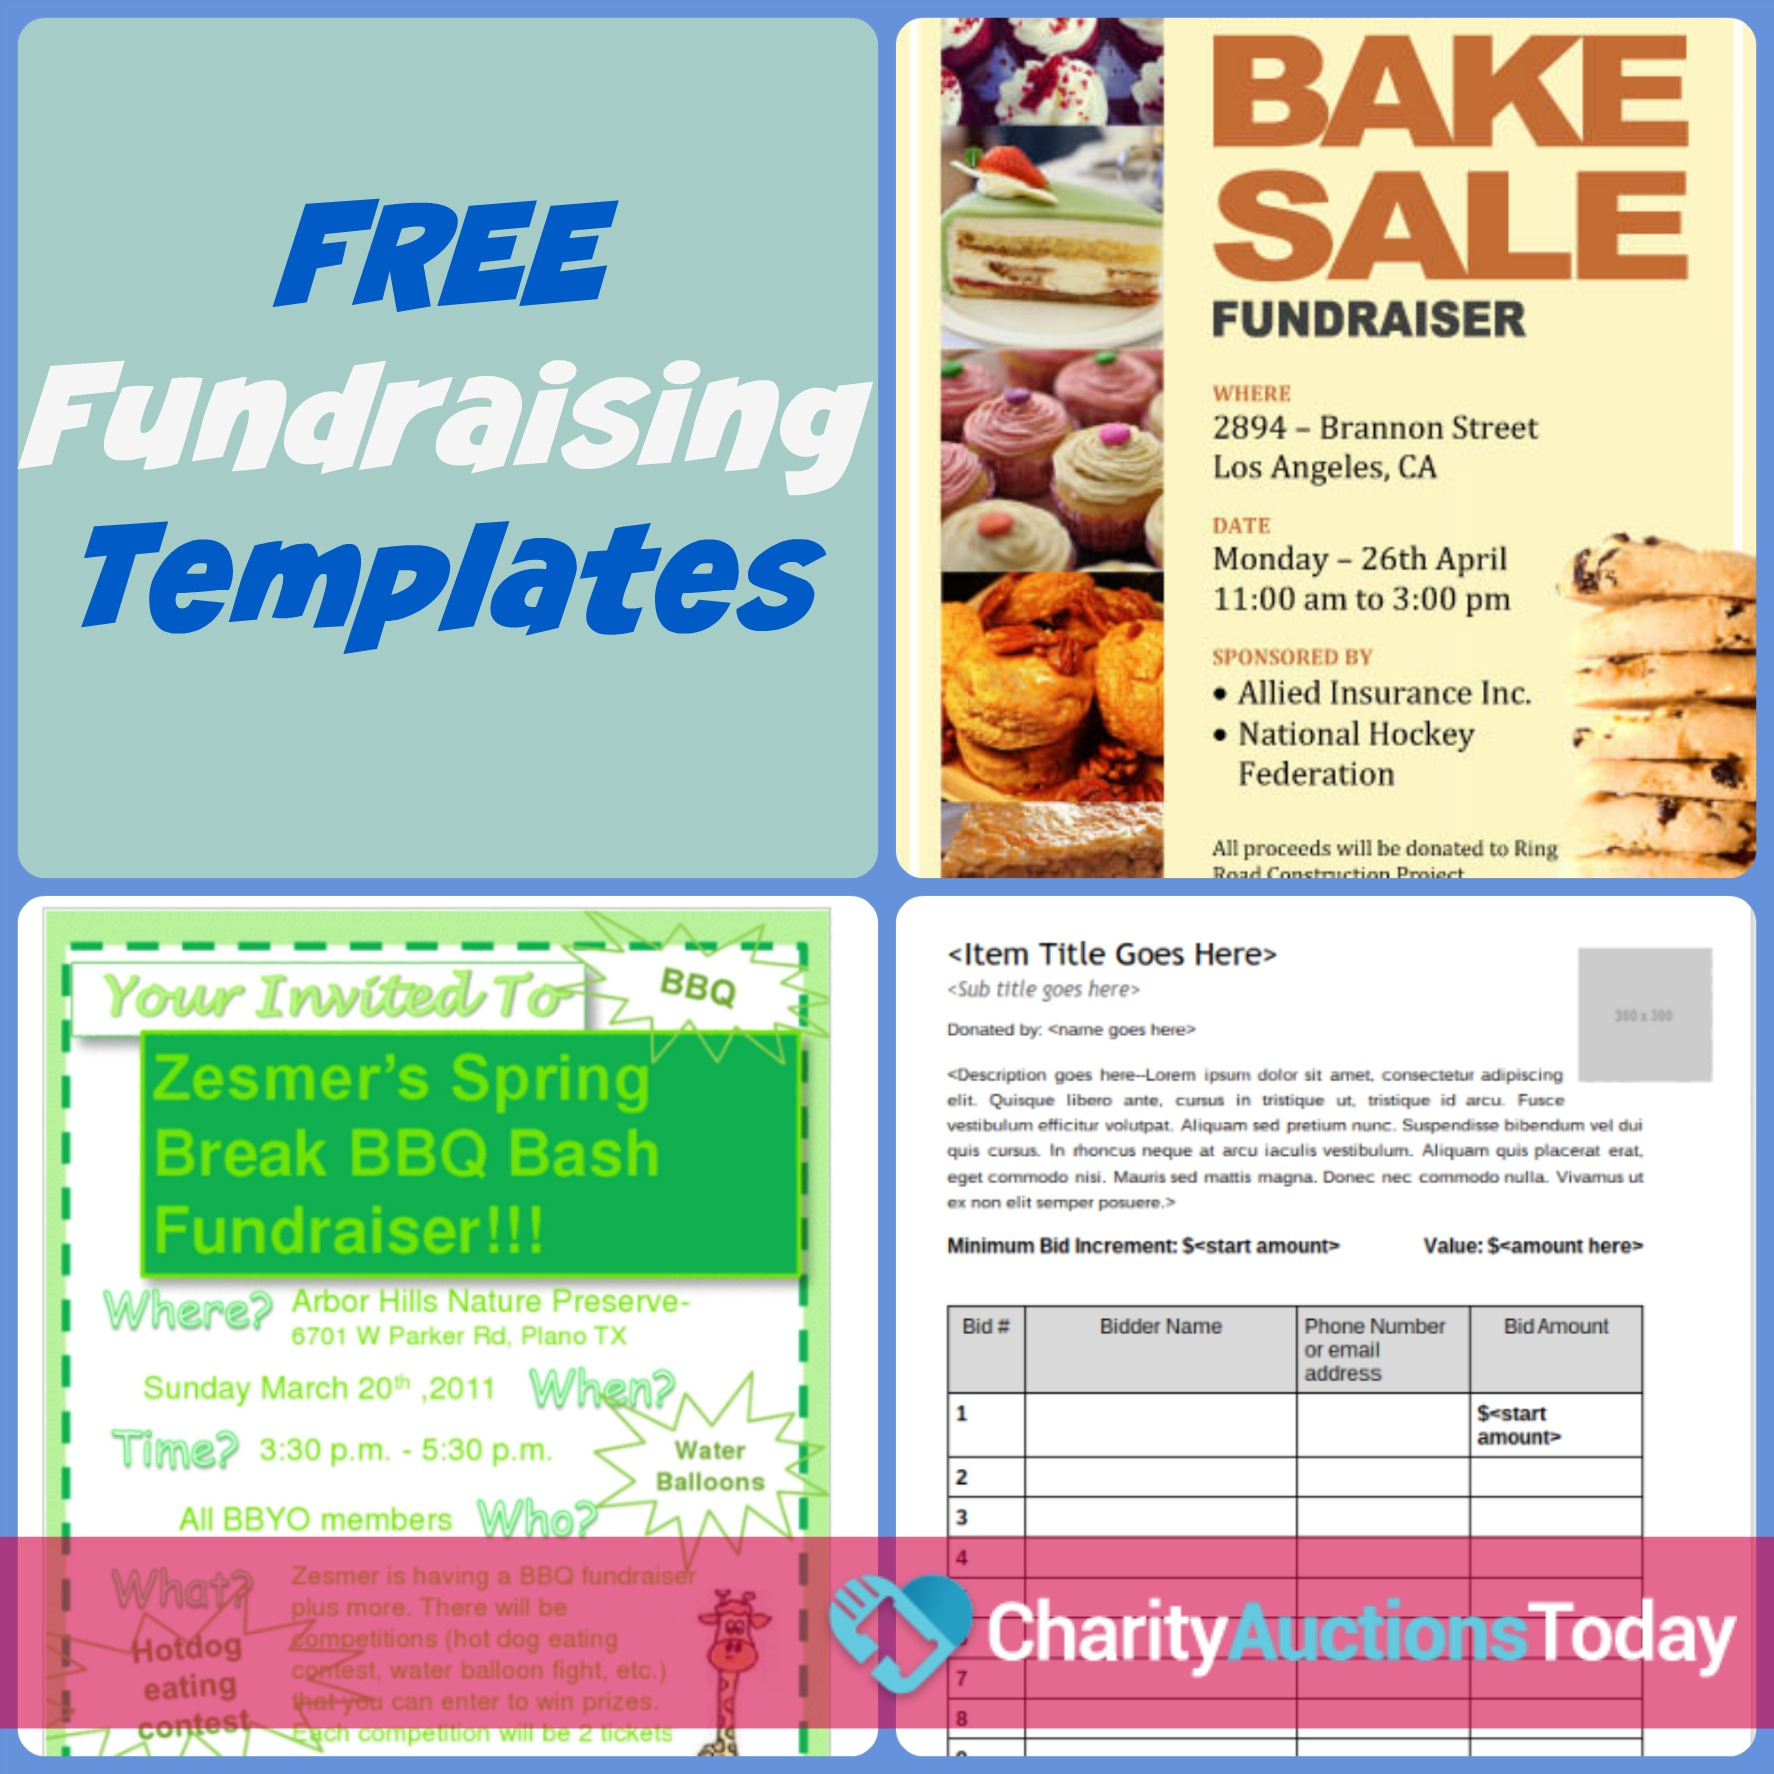 Free Fundraiser Flyer | Charity Auctions Today - Free Printable Flyers